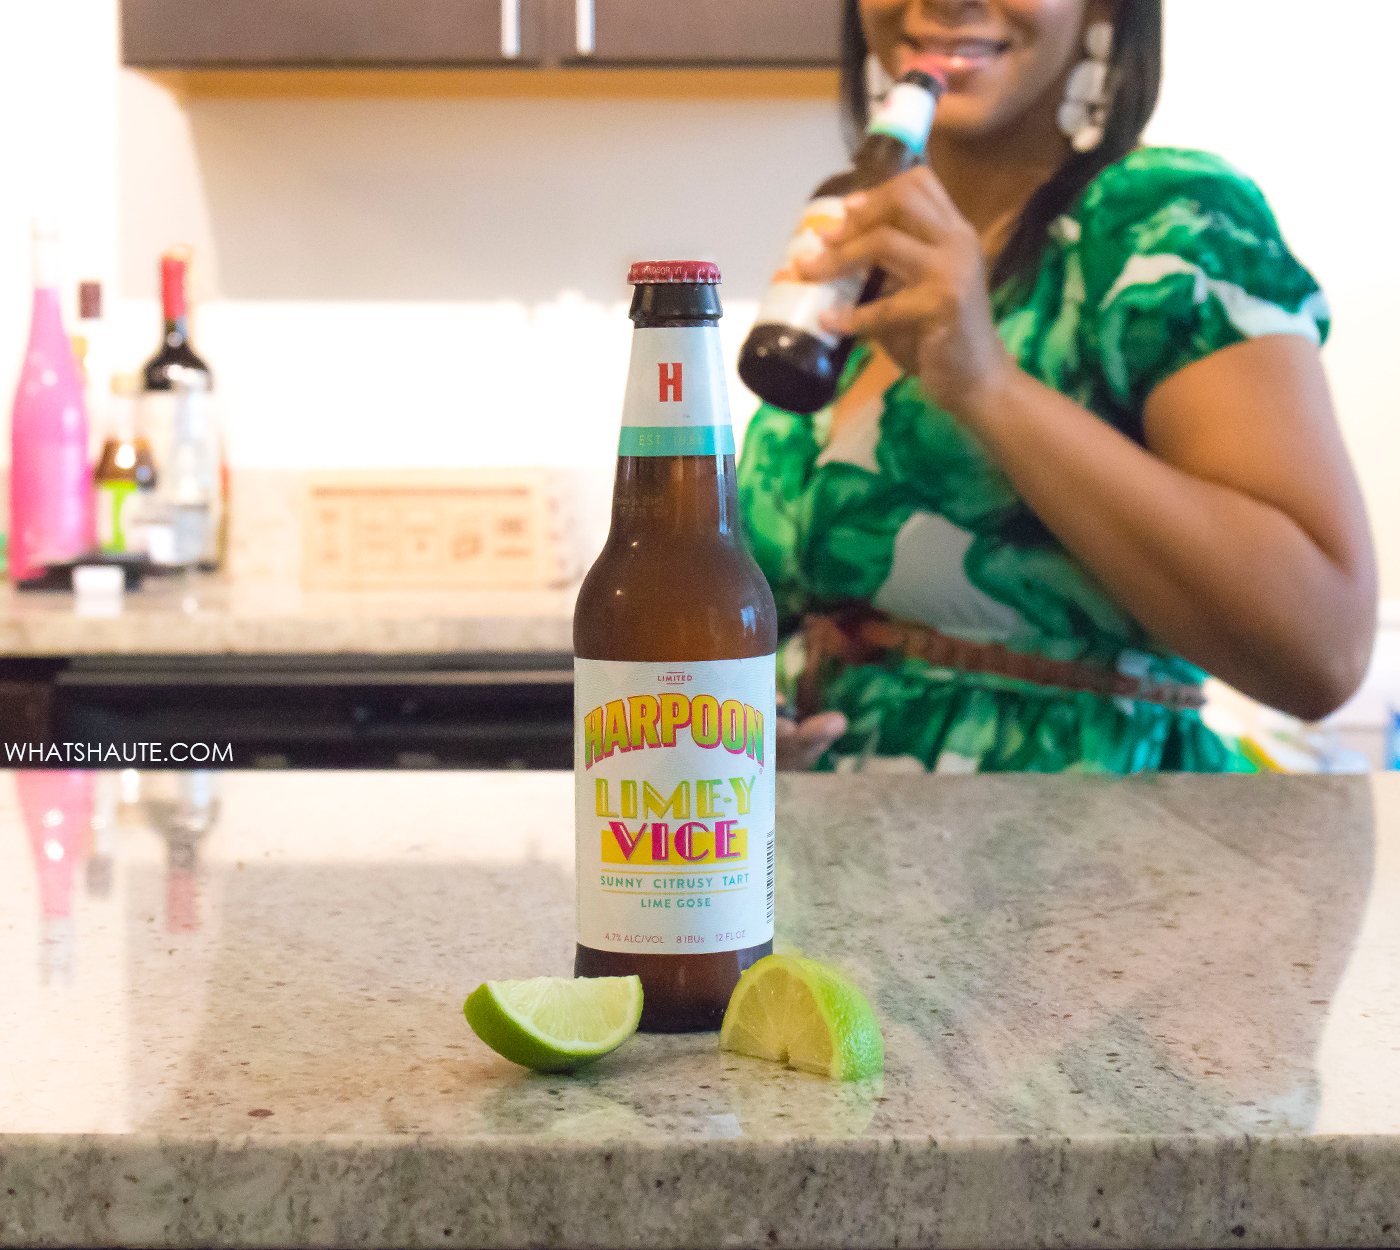 Harpoon Brewery Lime-y Vice Lime Gose style beer